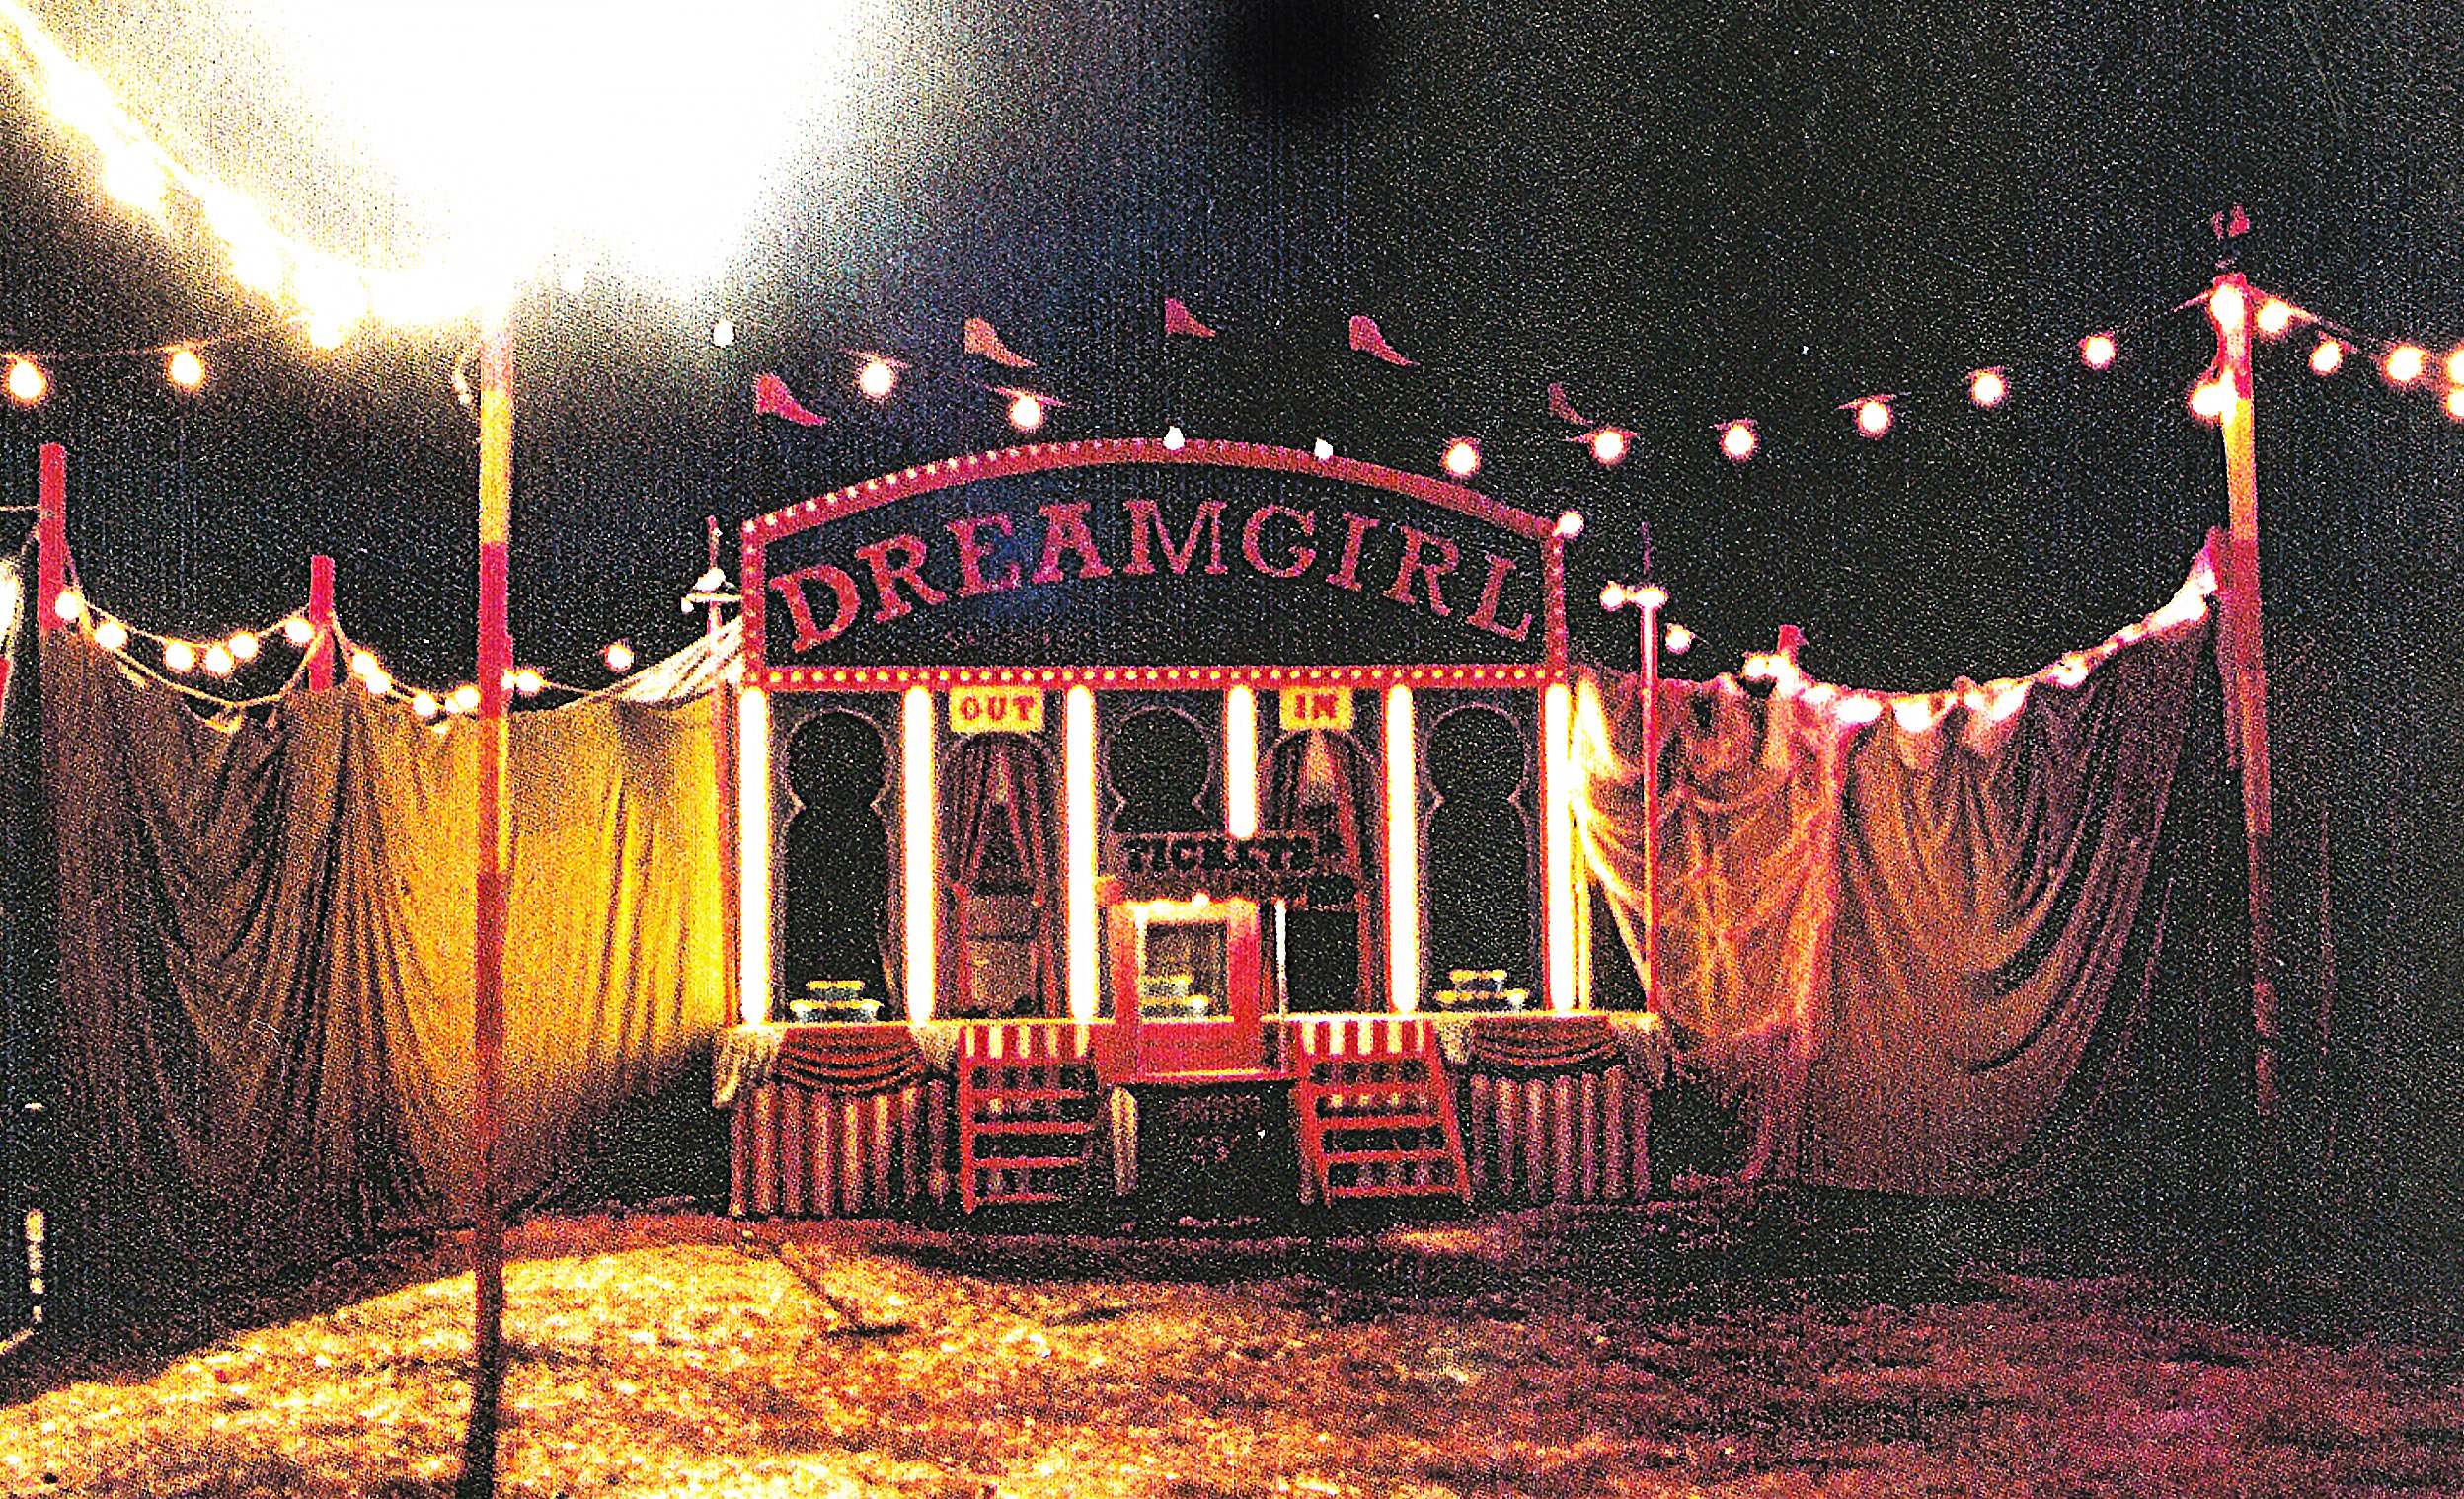 10 entry to dream tent .jpg